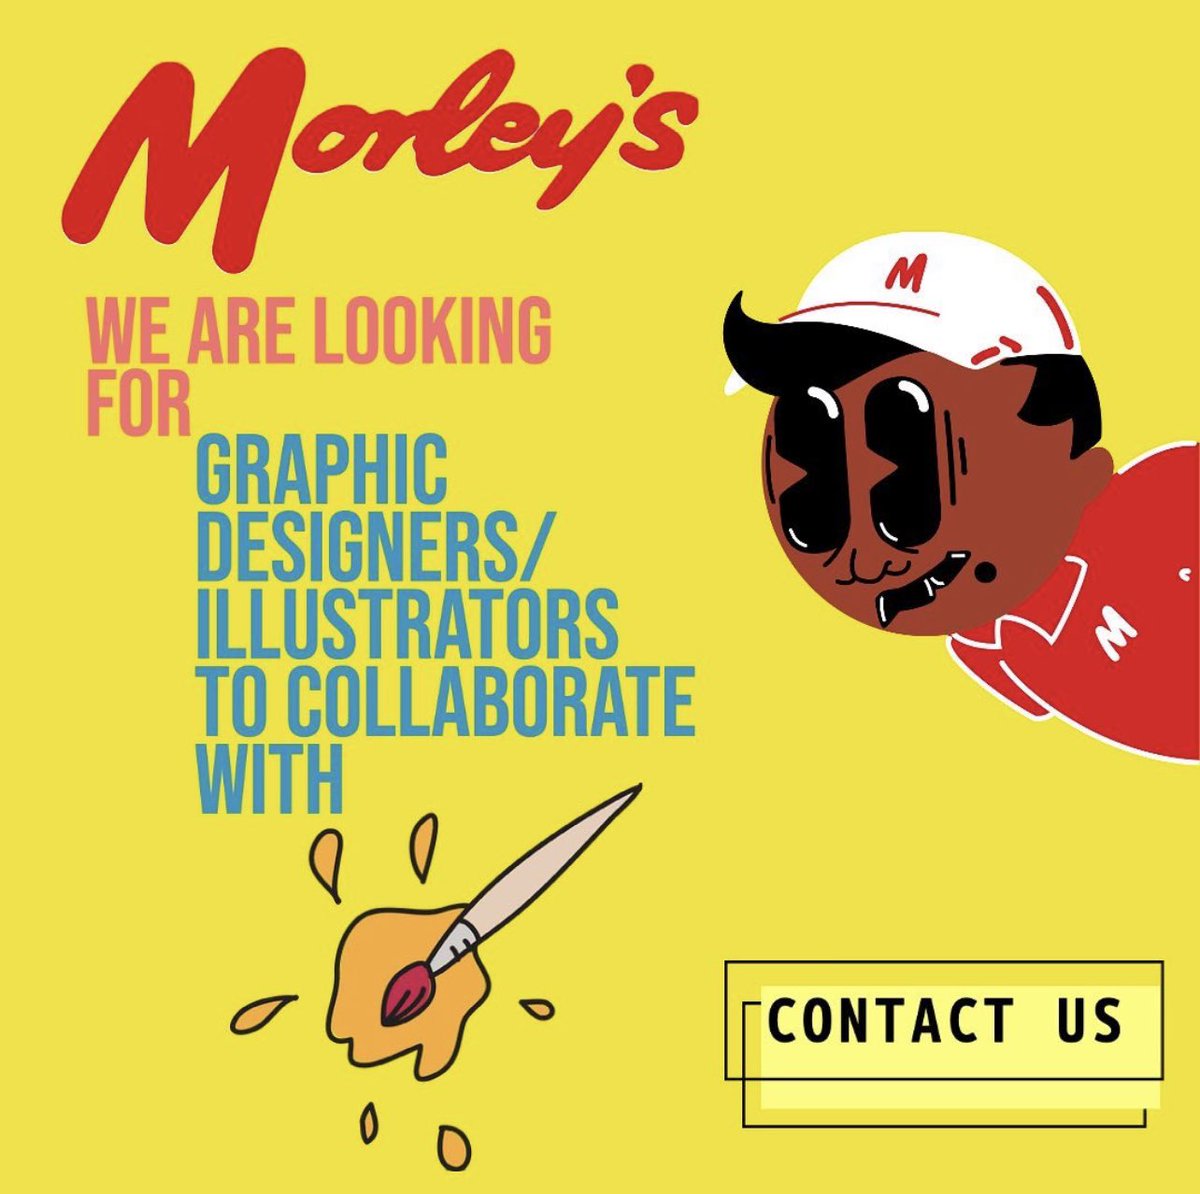 Calling all Graphic Designers: We are looking for graphic designers and illustrators to work with us at Morley’s Email us : Pr@morleyschicken.com